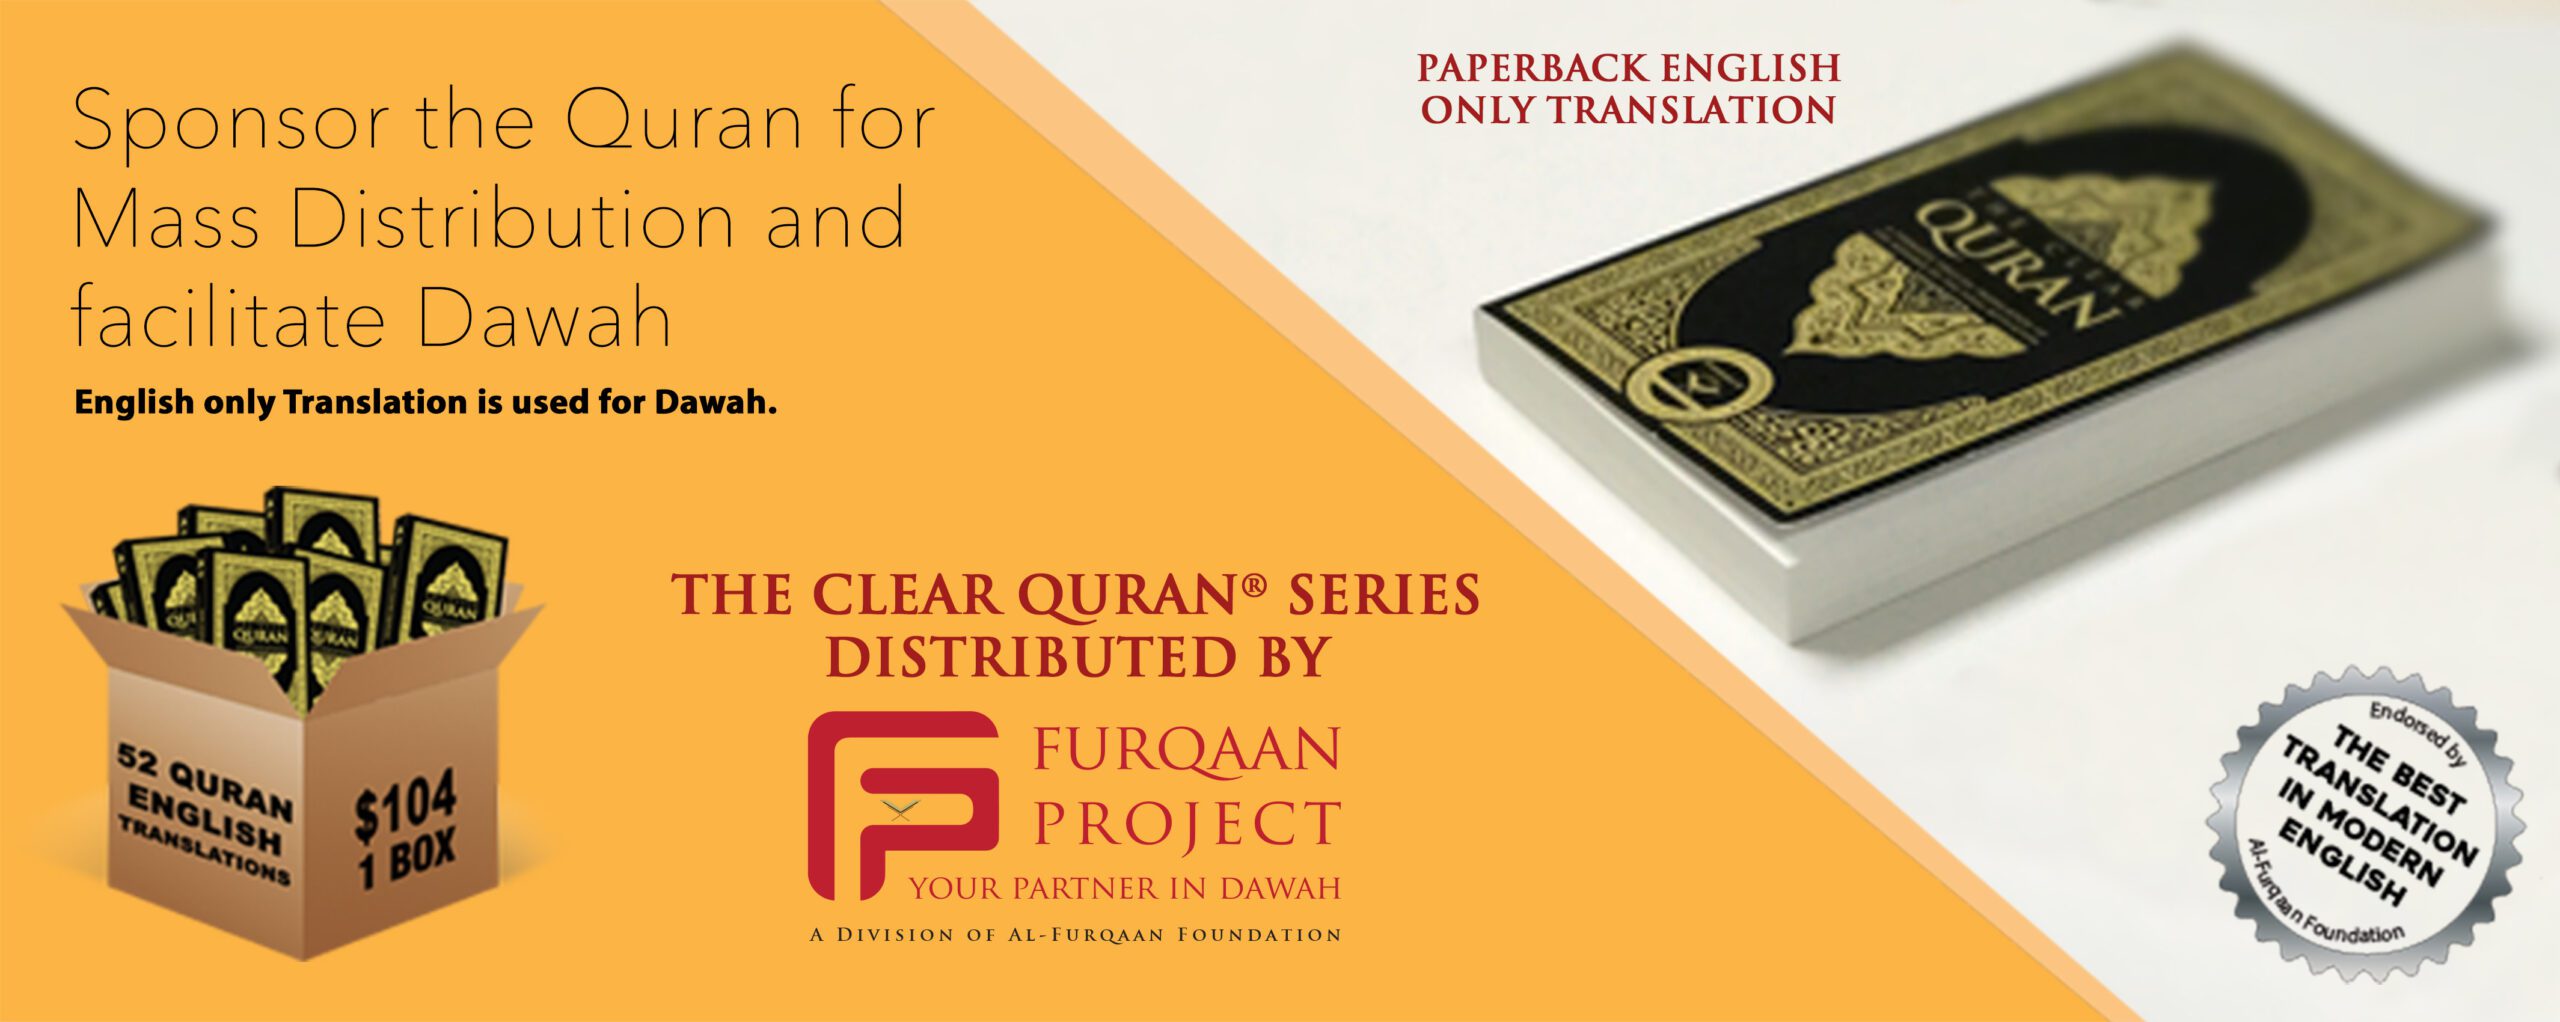 TheClearQuran_Slide-scaled